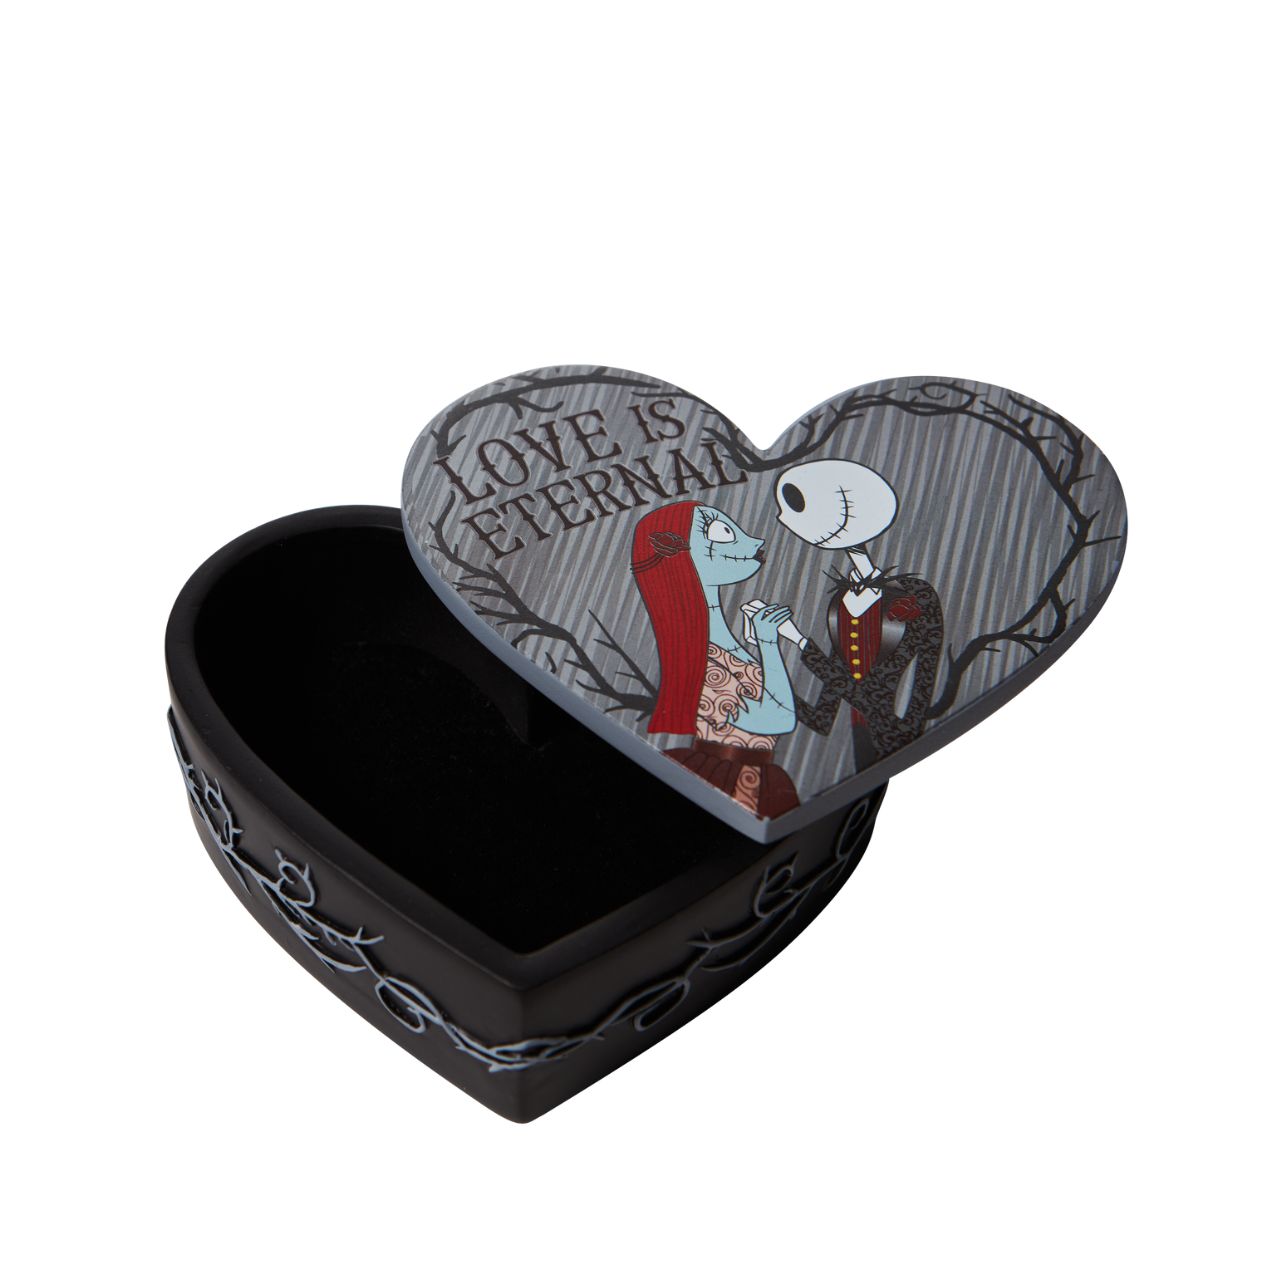 Jack and Sally Trinket Box Nightmare Before Christmas  Jack and Sally are an unlikely coupling of precious proportions. The Skellington King and ragdoll lock eyes in a romantic embrace upon this lidded felt lined ring box. 